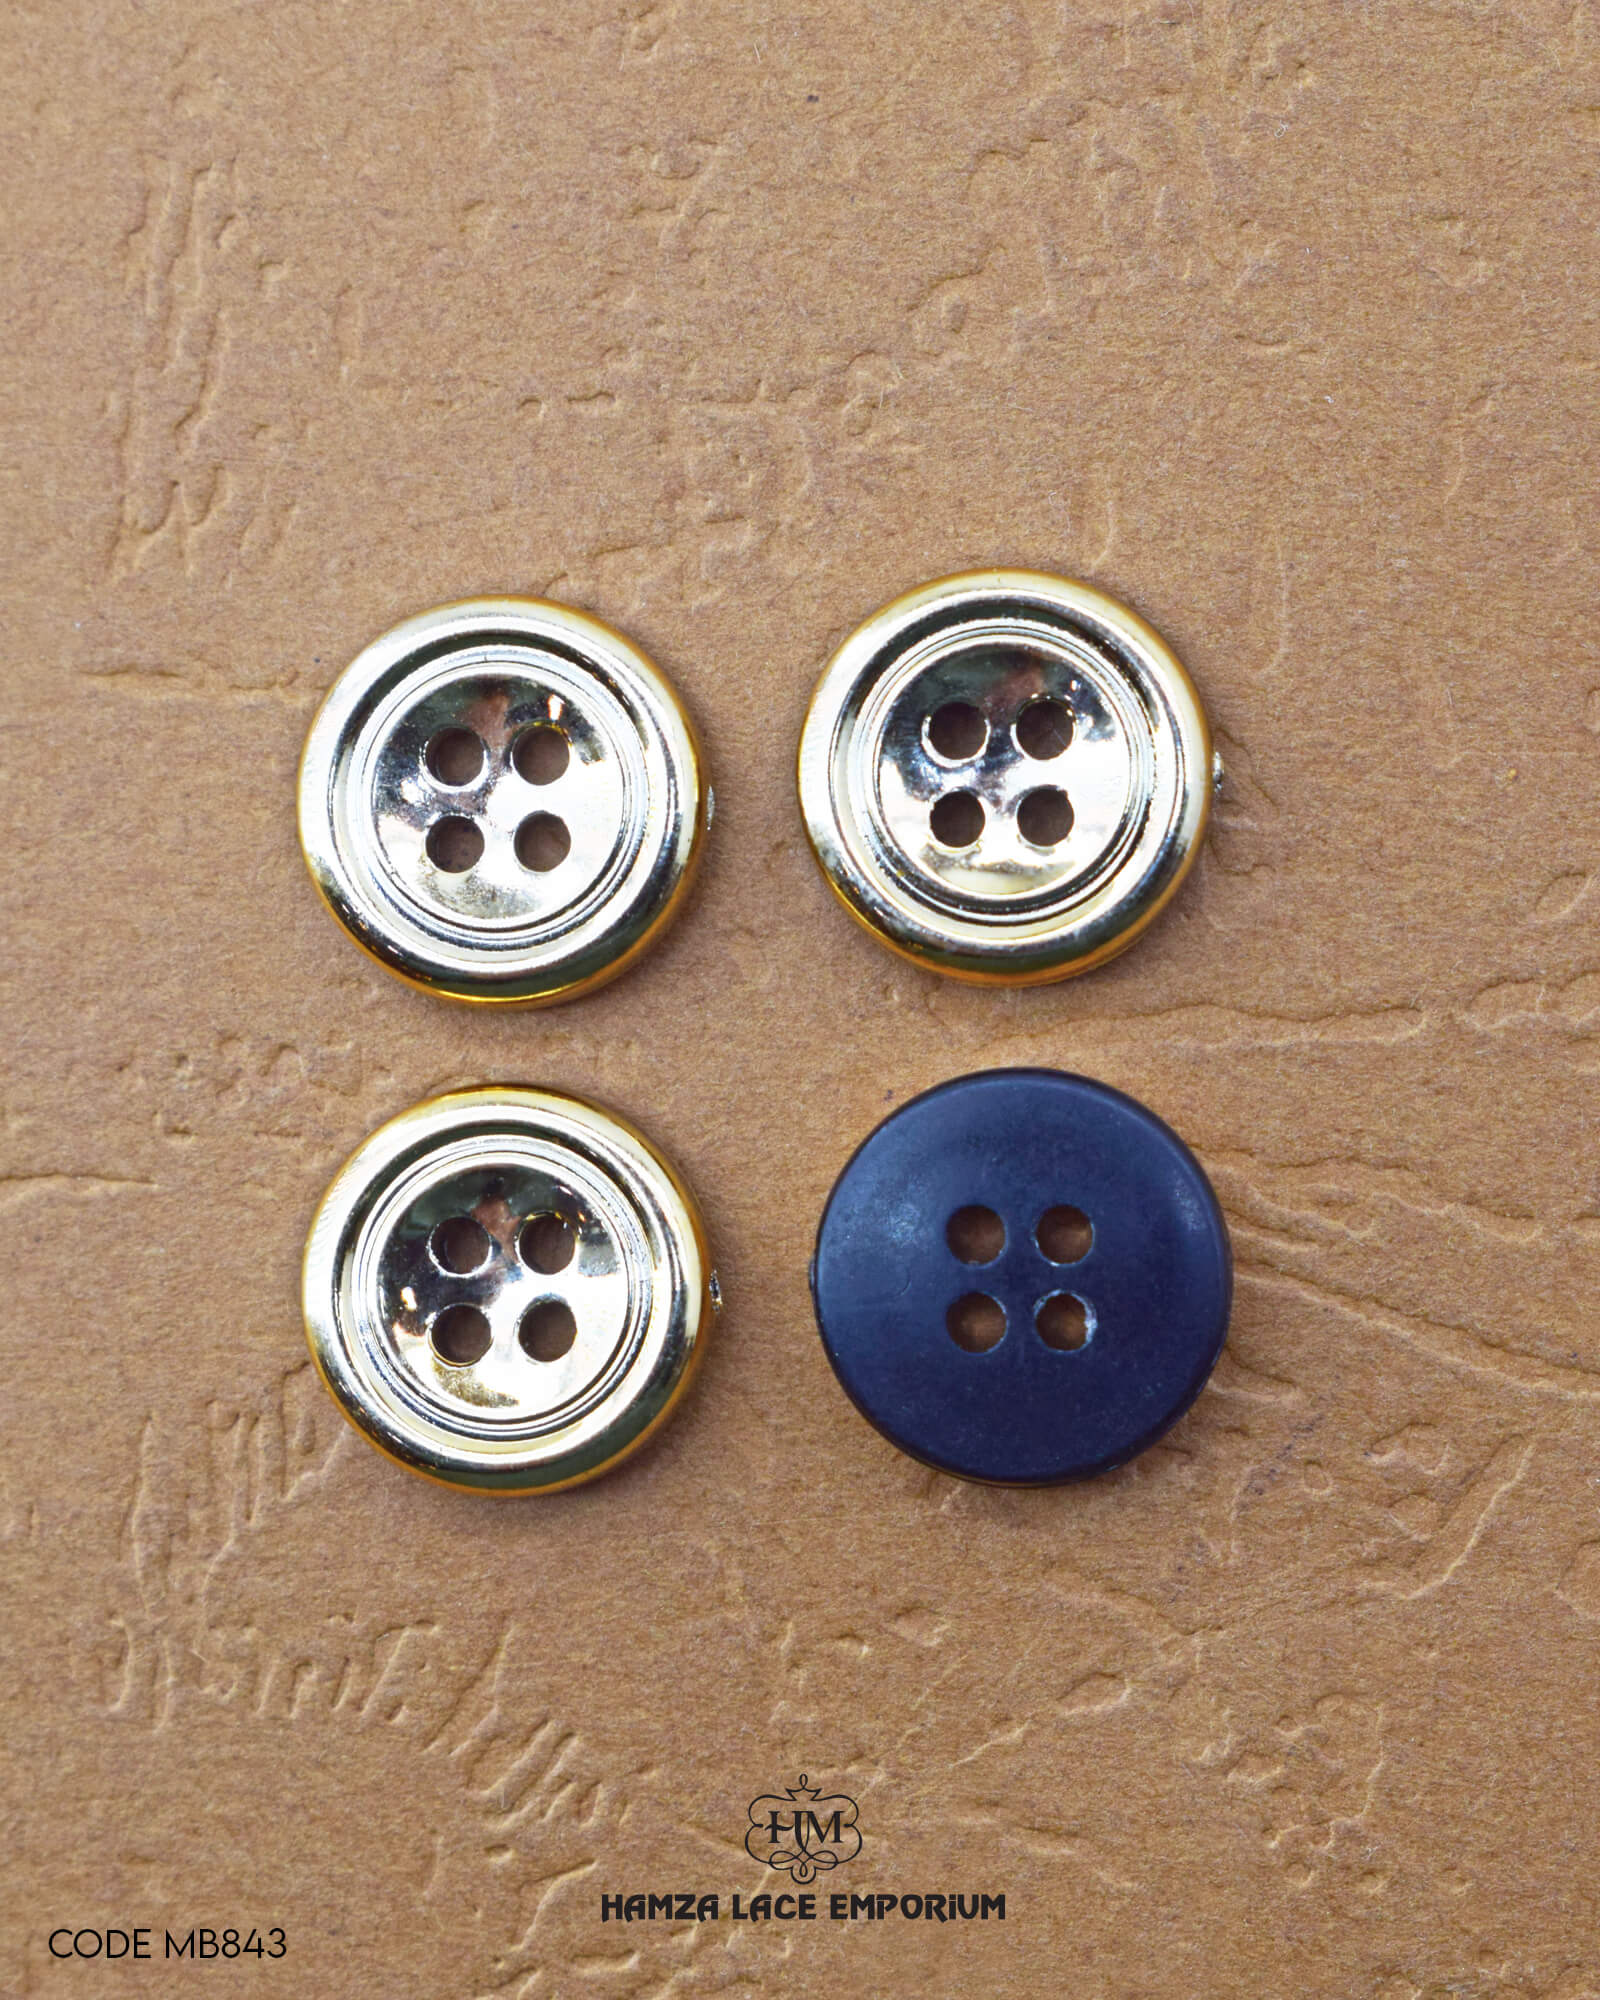 'Four Hole Golden Metal Button' by Hamza Lace - high-quality and stylish accessory for clothing and crafts